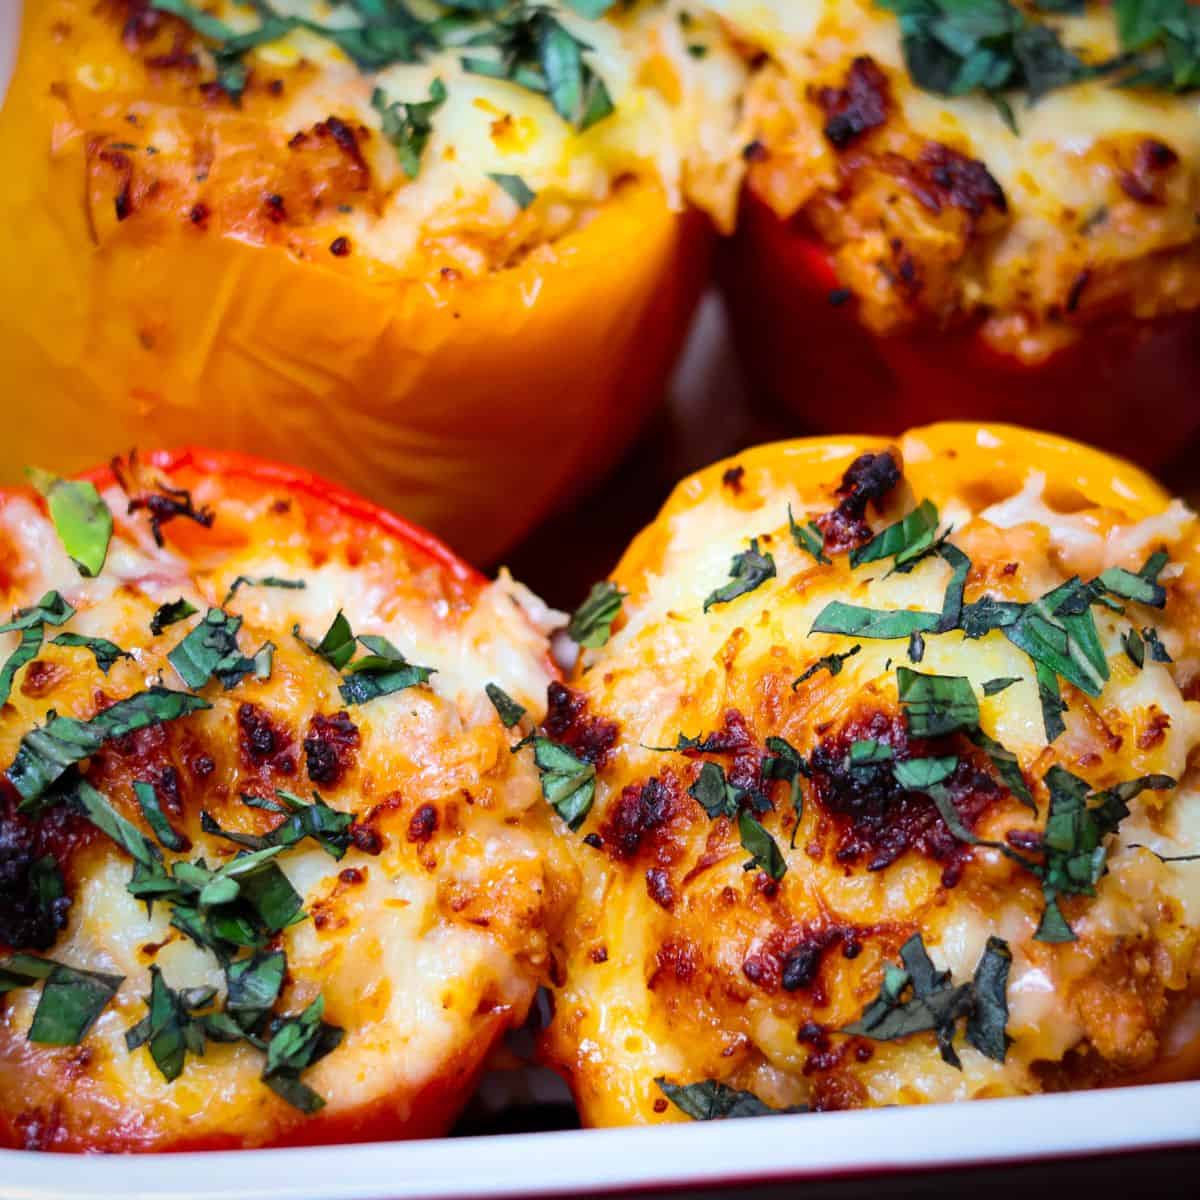 Freshly baked stuffed bell peppers in a casserole dish, cheese melted and slightly browned, garnishe